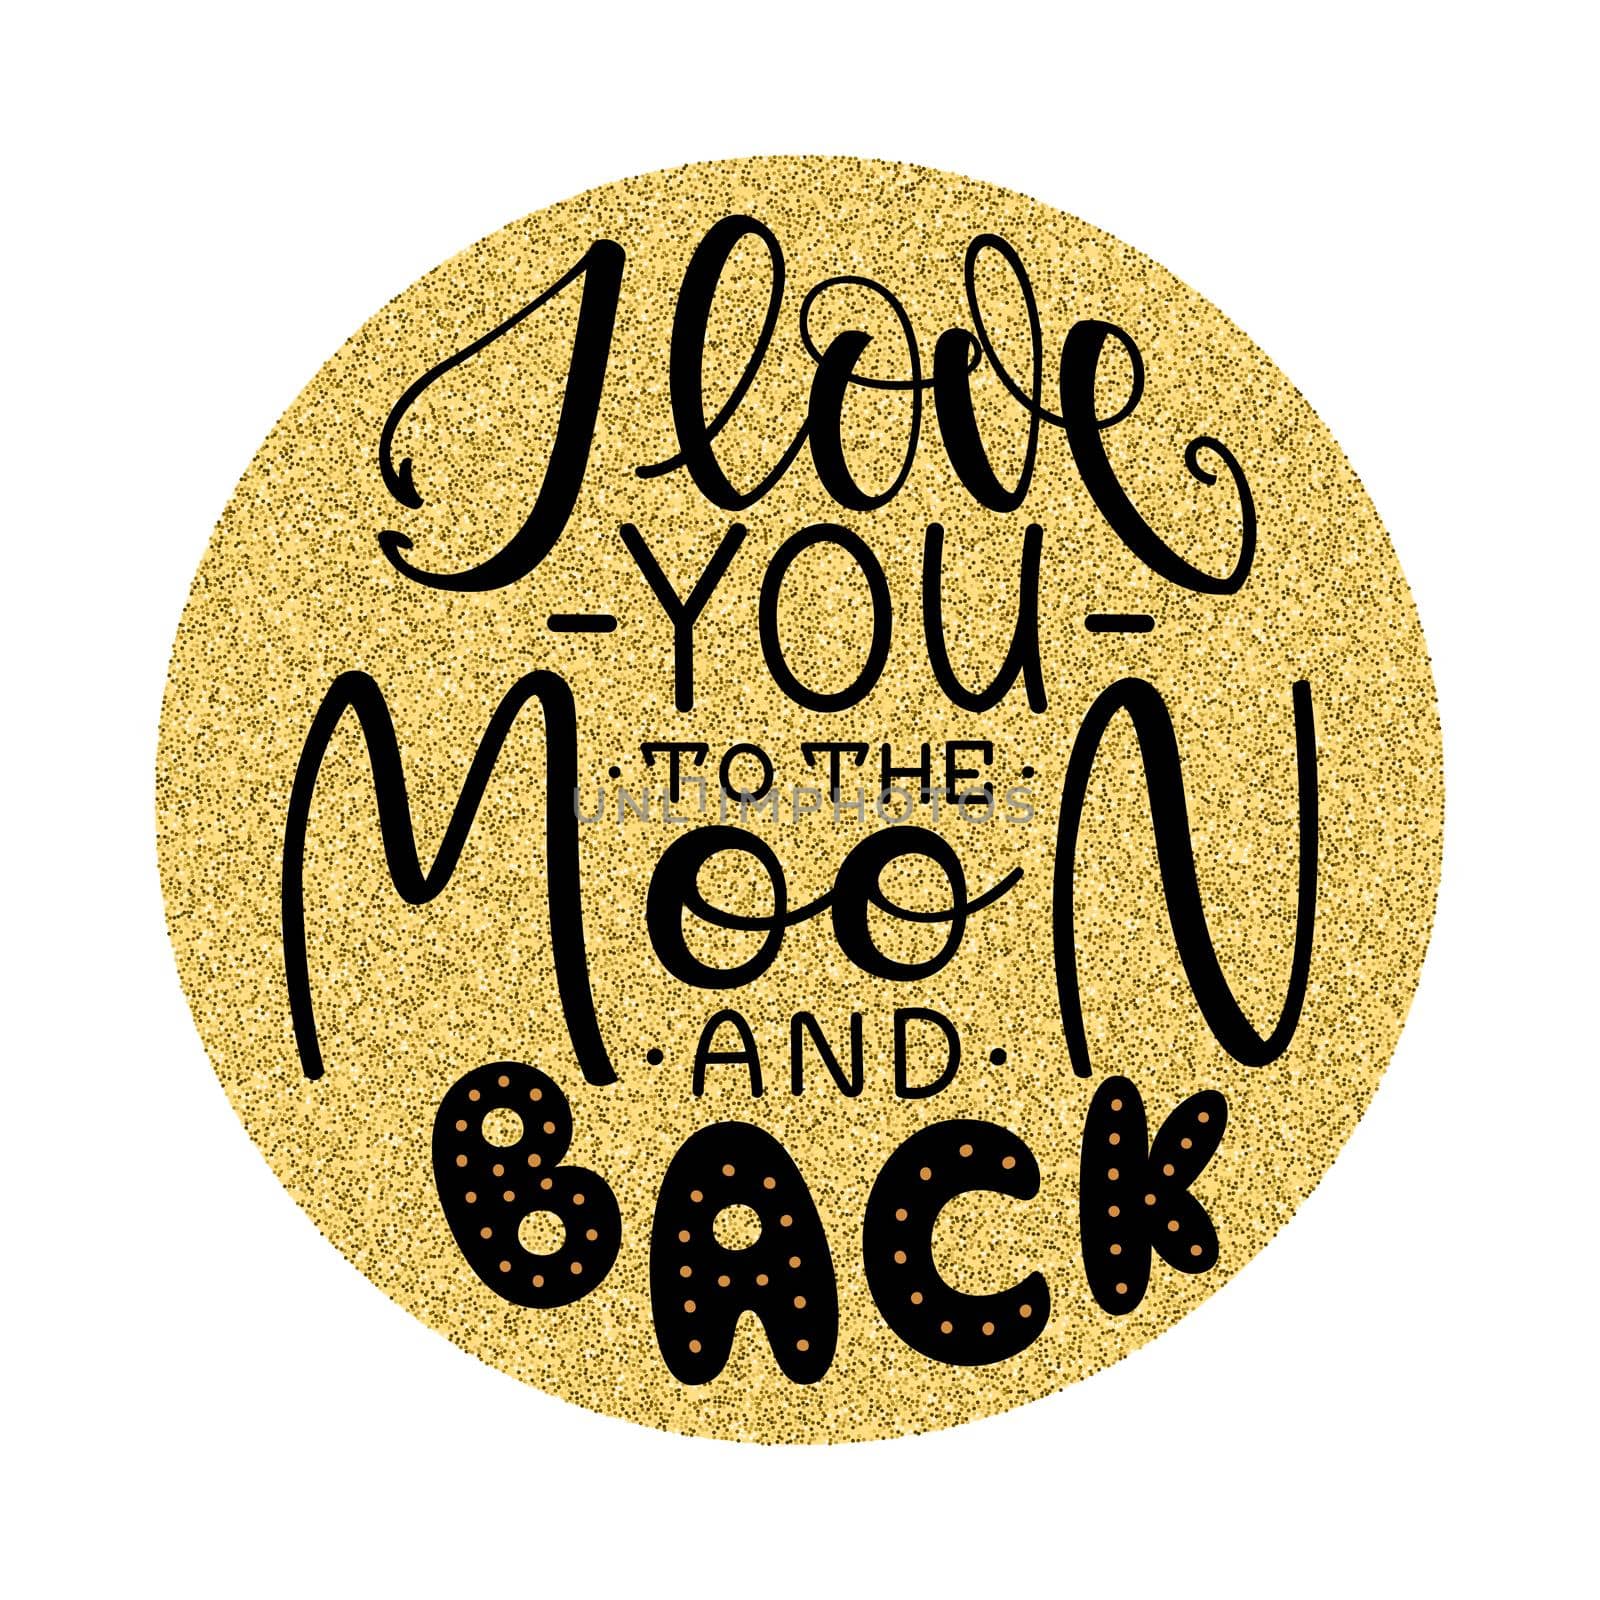 I love you to the moon and back. Inspirational romantic lettering isolated on white background. illustration for Valentines day greeting cards, posters and much more by Marin4ik